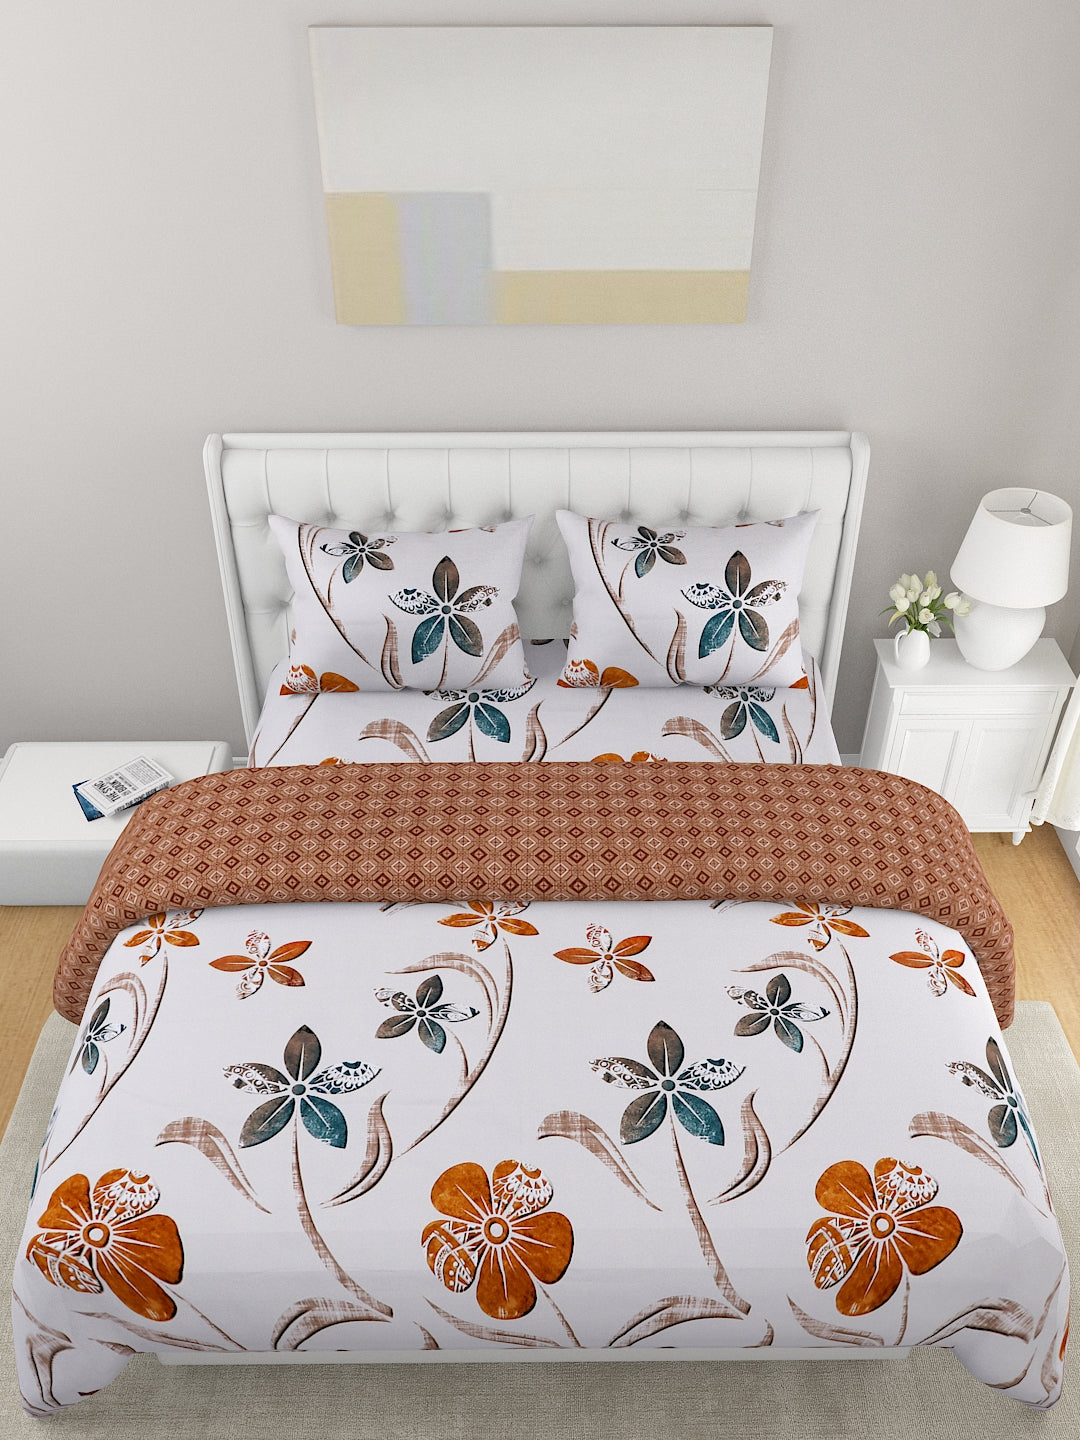 Brown & White Printed Double Queen Bedding Set